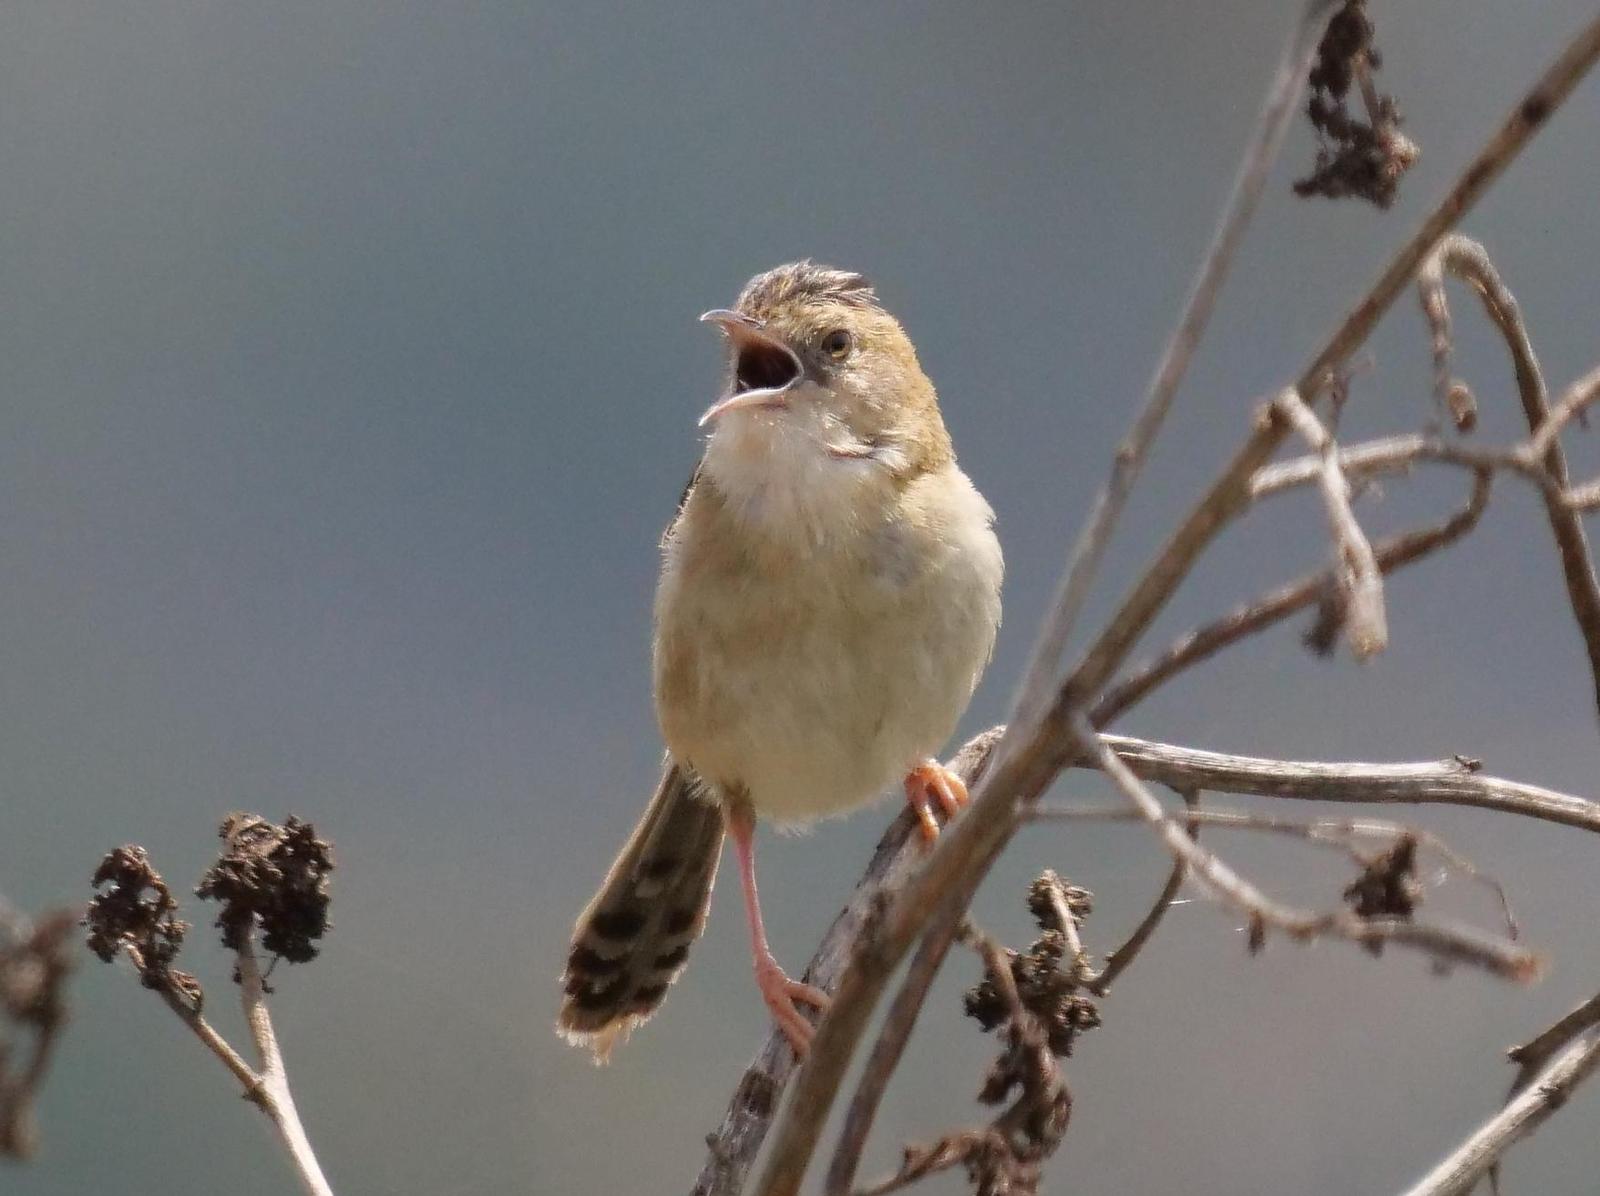 Golden-headed Cisticola Photo by Peter Lowe